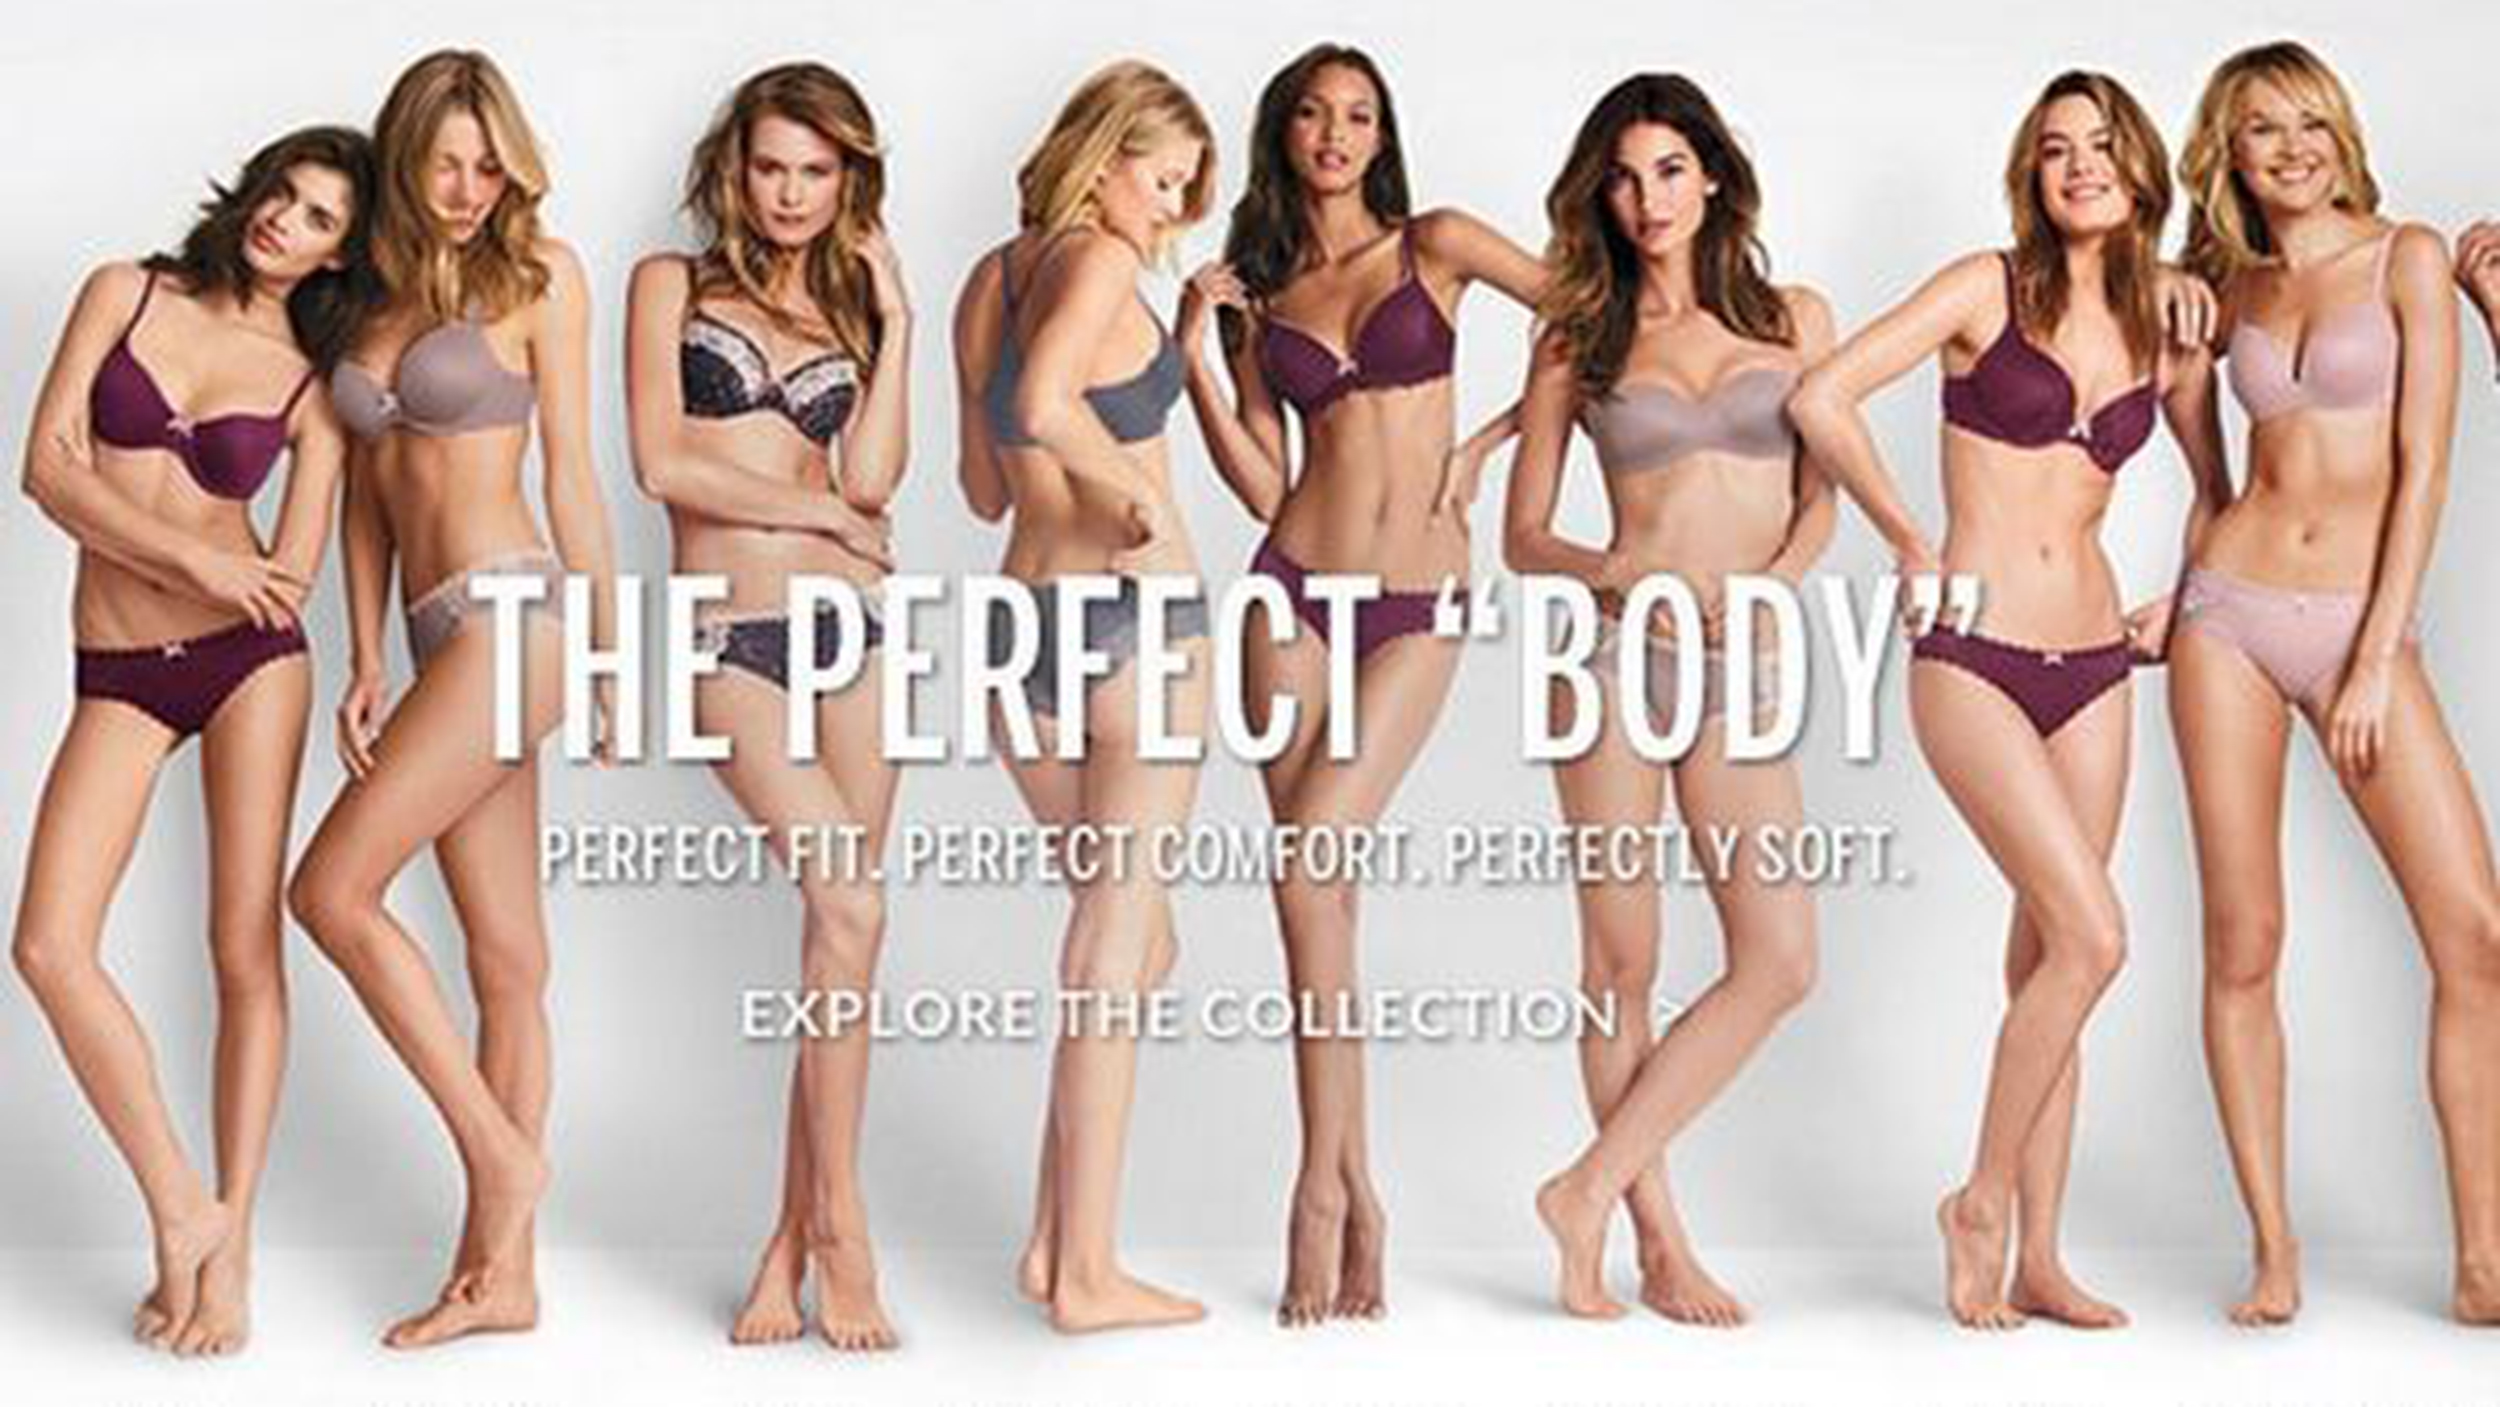 Victoria's Secret Accused Of Promoting Unattainable Beauty